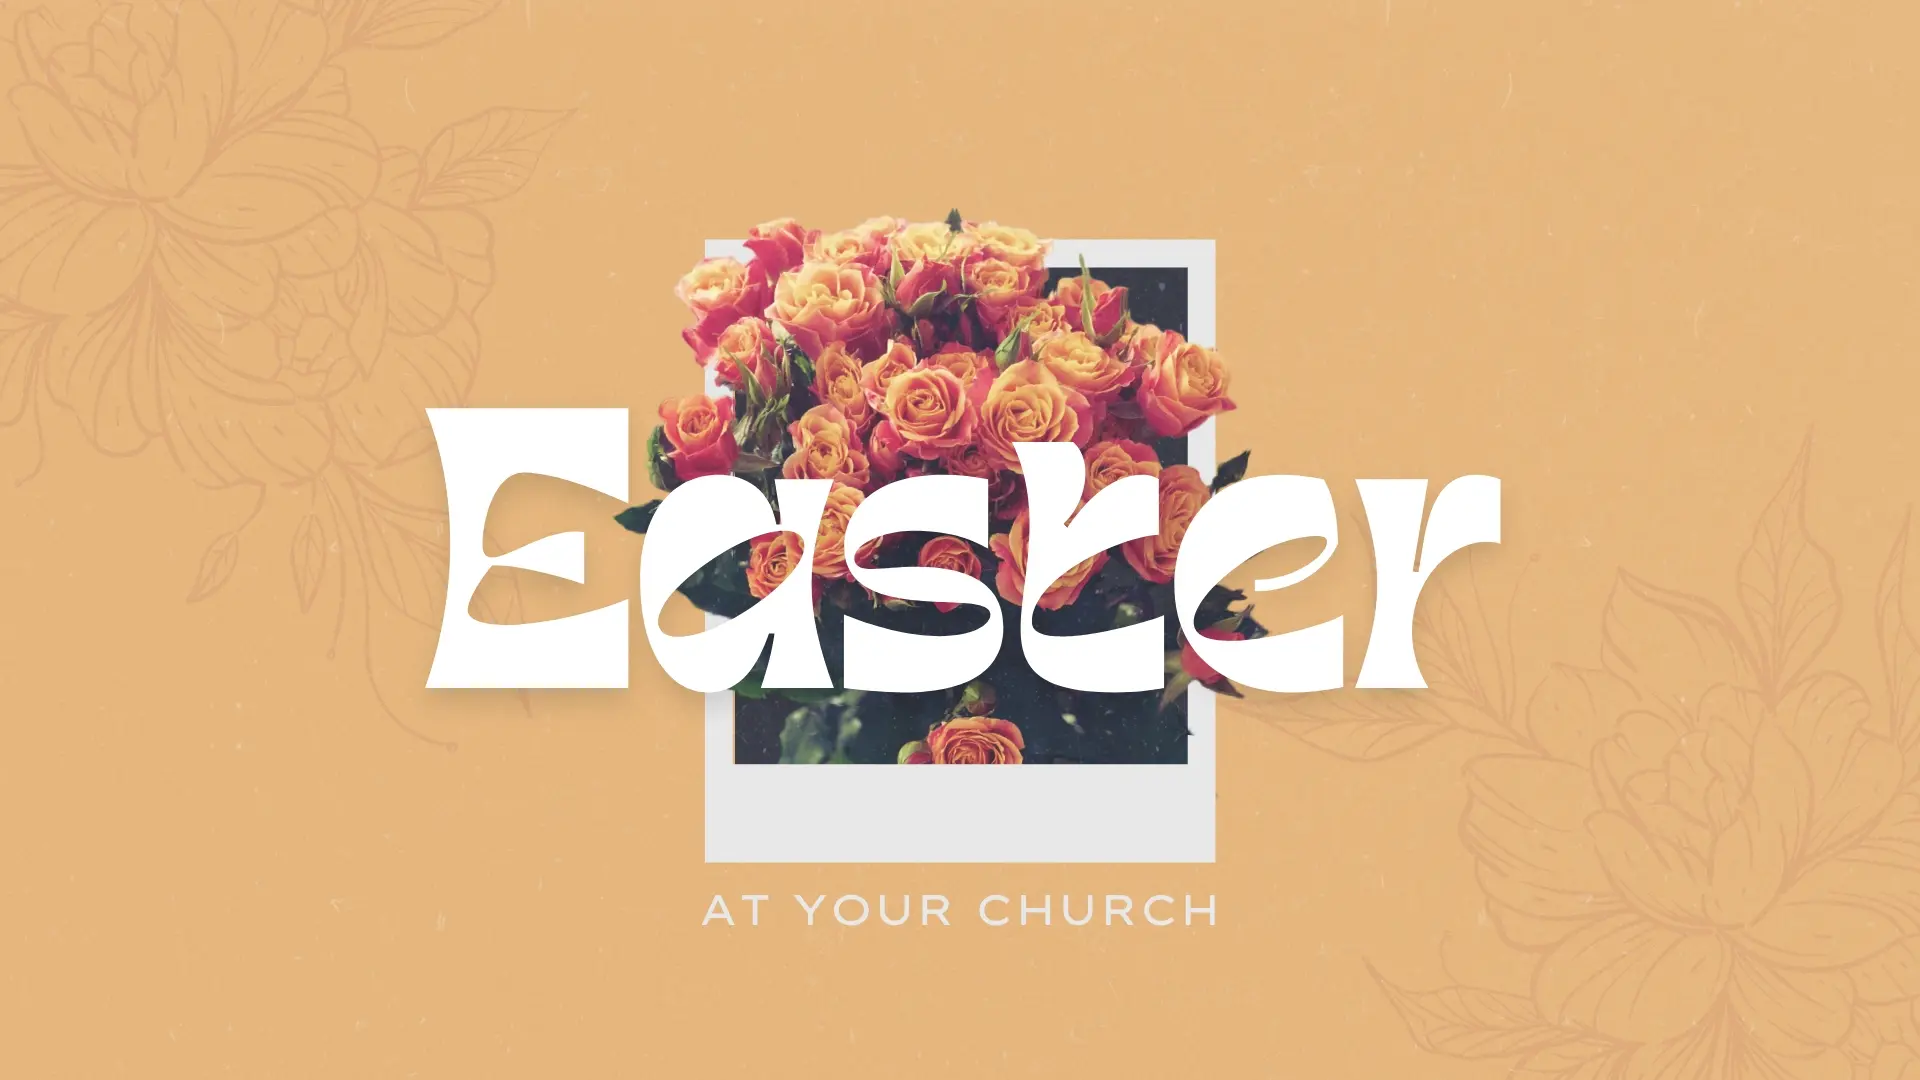 Celebrate The Resurrection With This Vibrant Easter Church Event Canva Template, Featuring A Bouquet Of Roses Against A Warm, Tan Backdrop And Floral Sketches, Creating A Welcoming Invitation To Your Services.